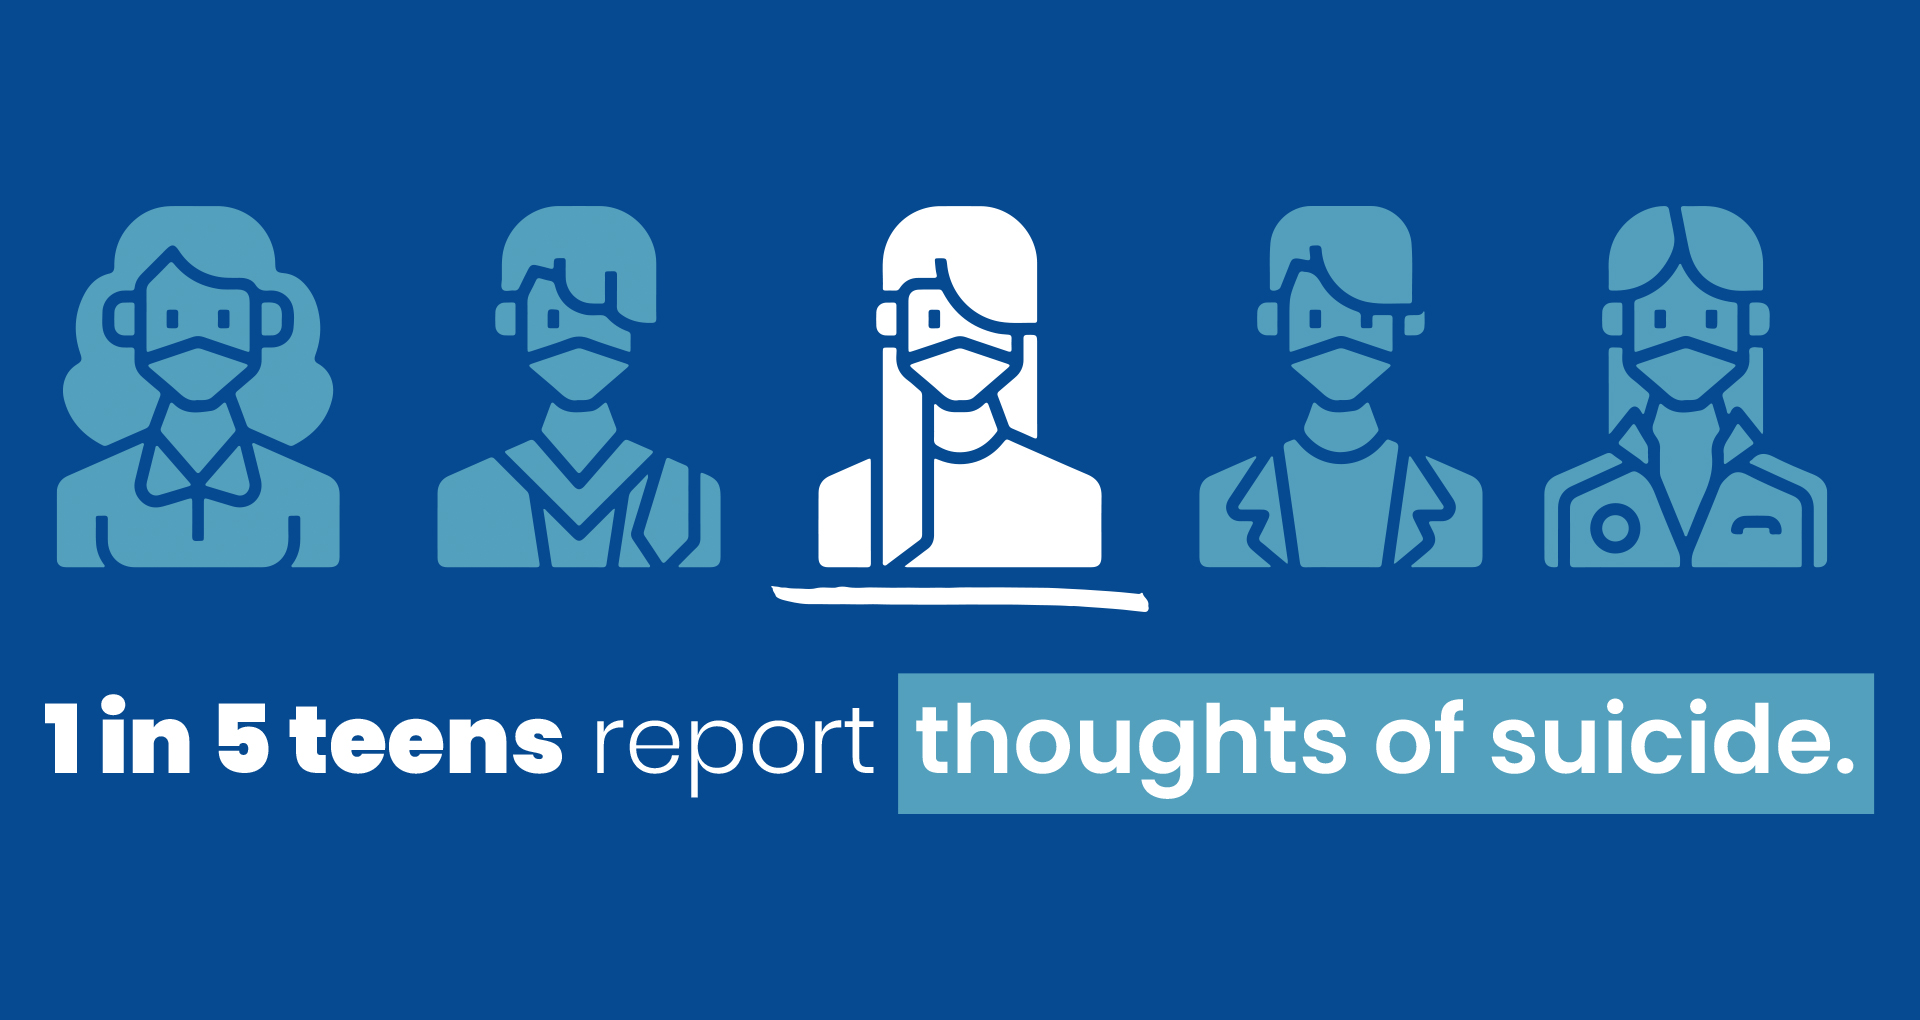 1 in 5 teens report thoughts of suicide.